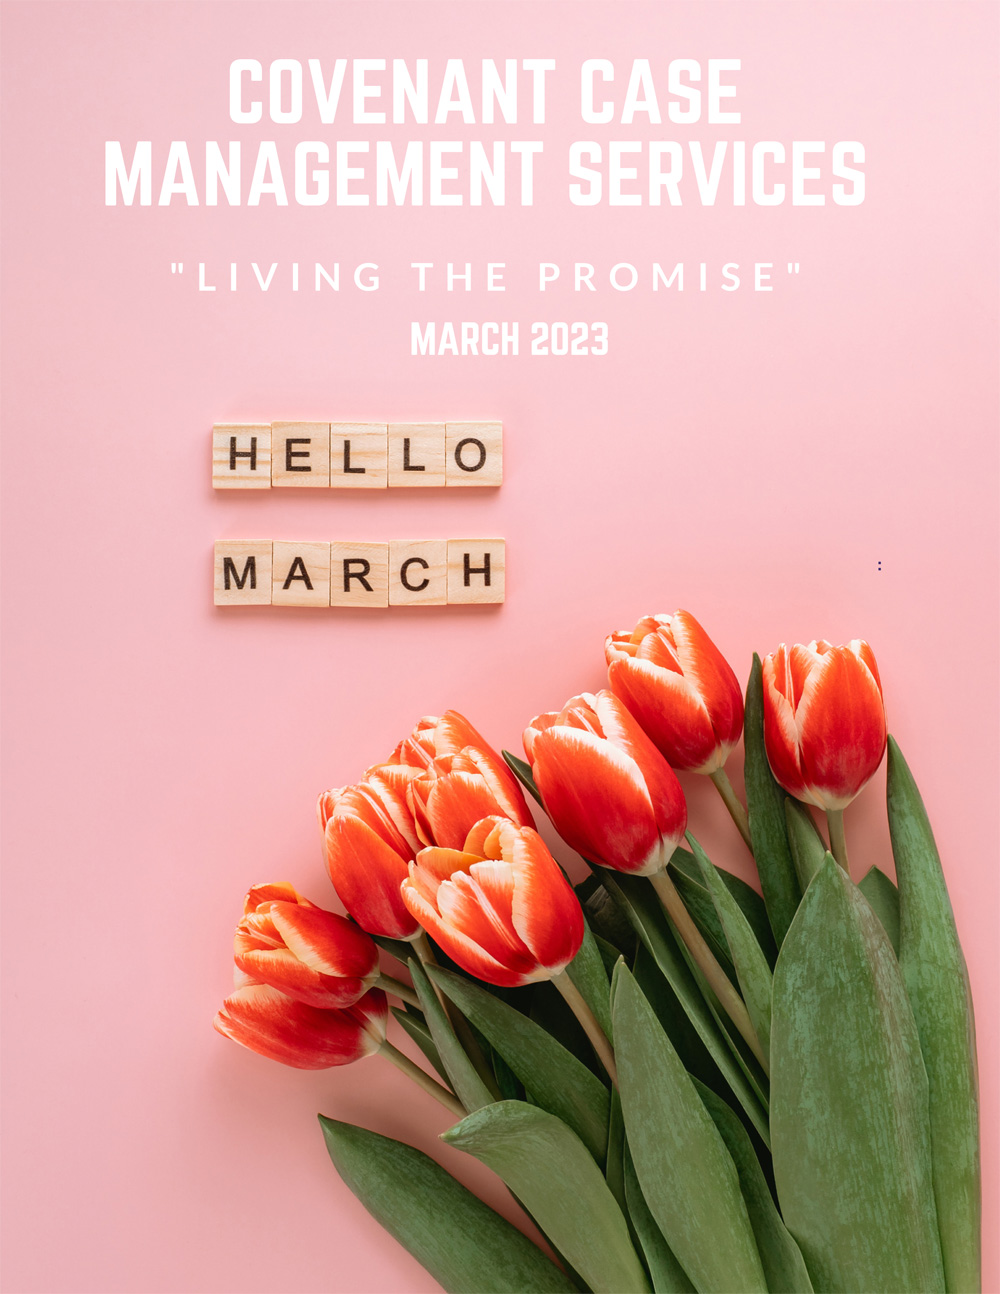 March 2023 Newsletter from Covenant Case Management Services